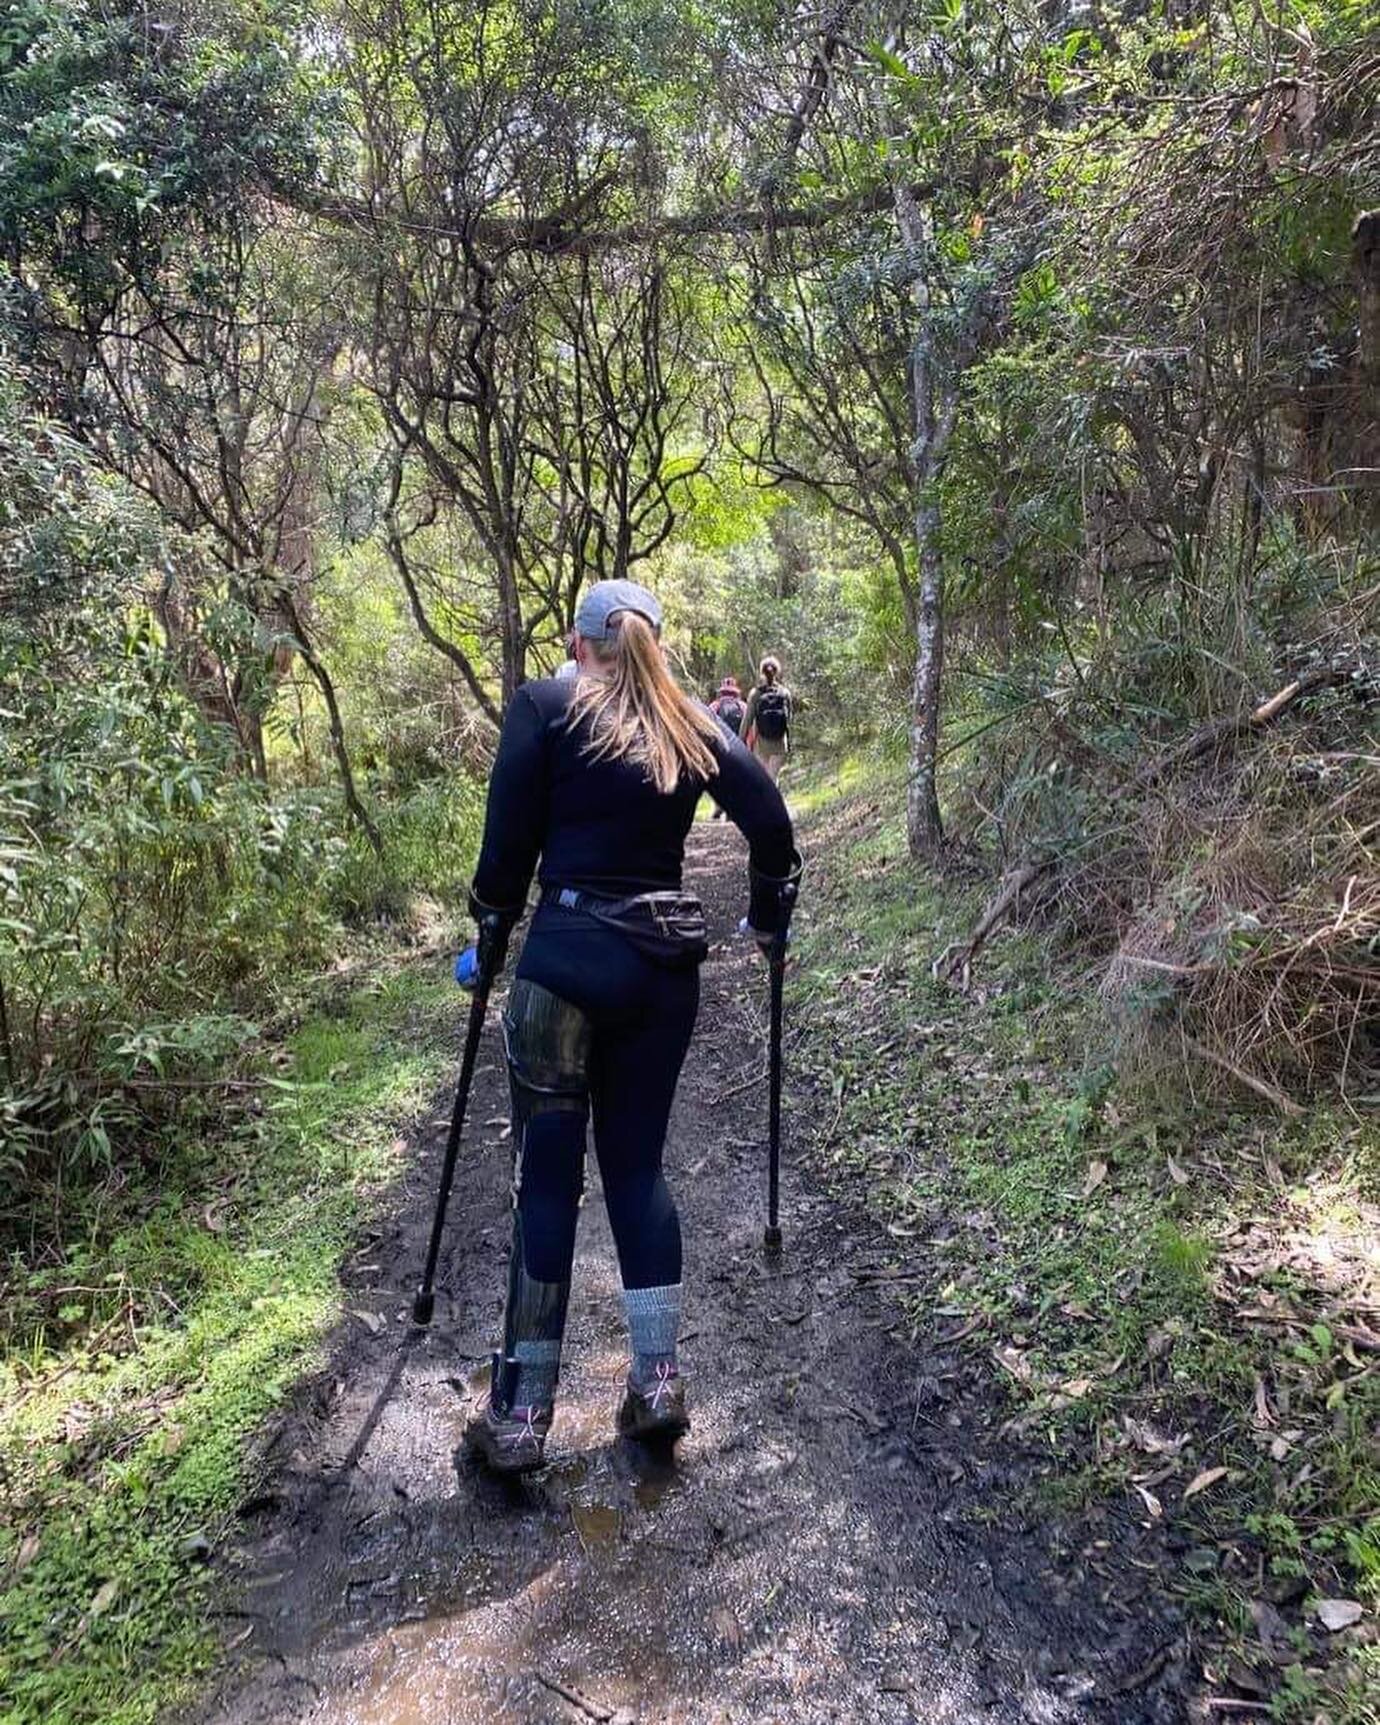 NMO love seeing clients meeting their goals  whether it&rsquo;s going to the shops or hiking the Great Ocean Road! Our client utilises her locked KAFO with an Ottobock Knee Joint and Fior &amp; Gentz NeuroSwing 2 ankle joint! #liveanordinarylife #par